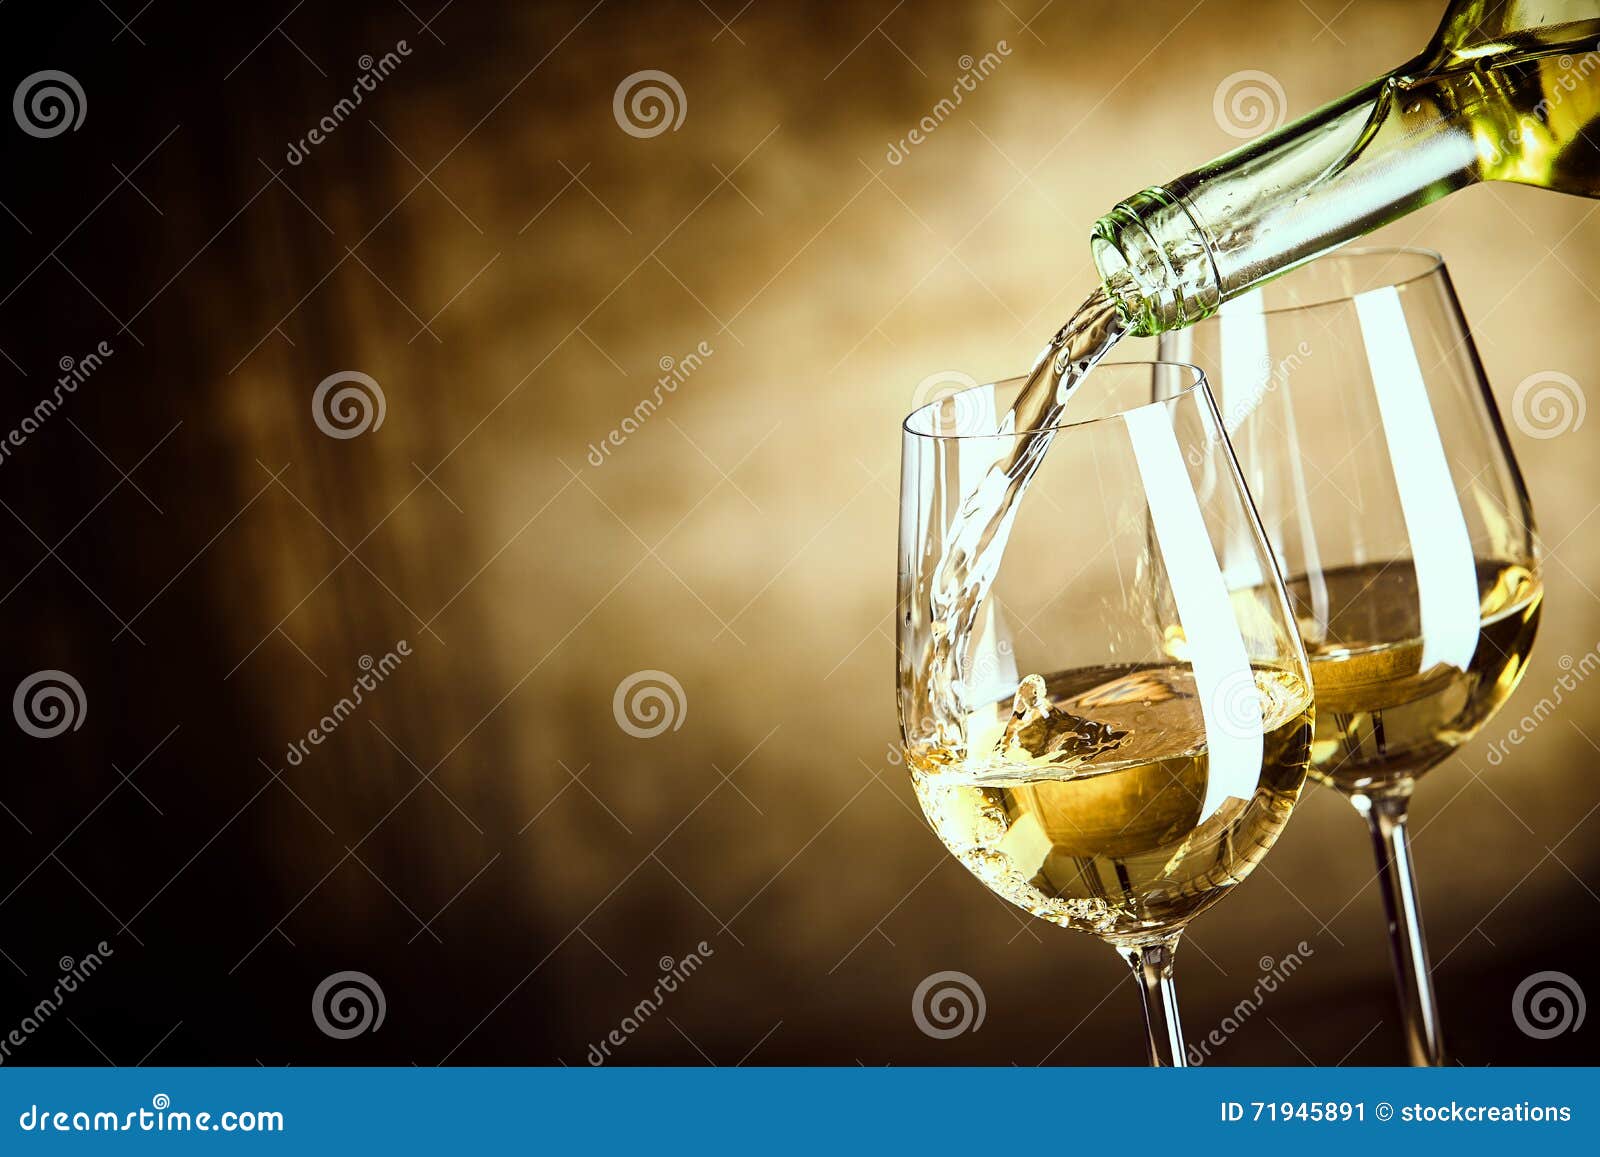 pouring two glasses of white wine from a bottle